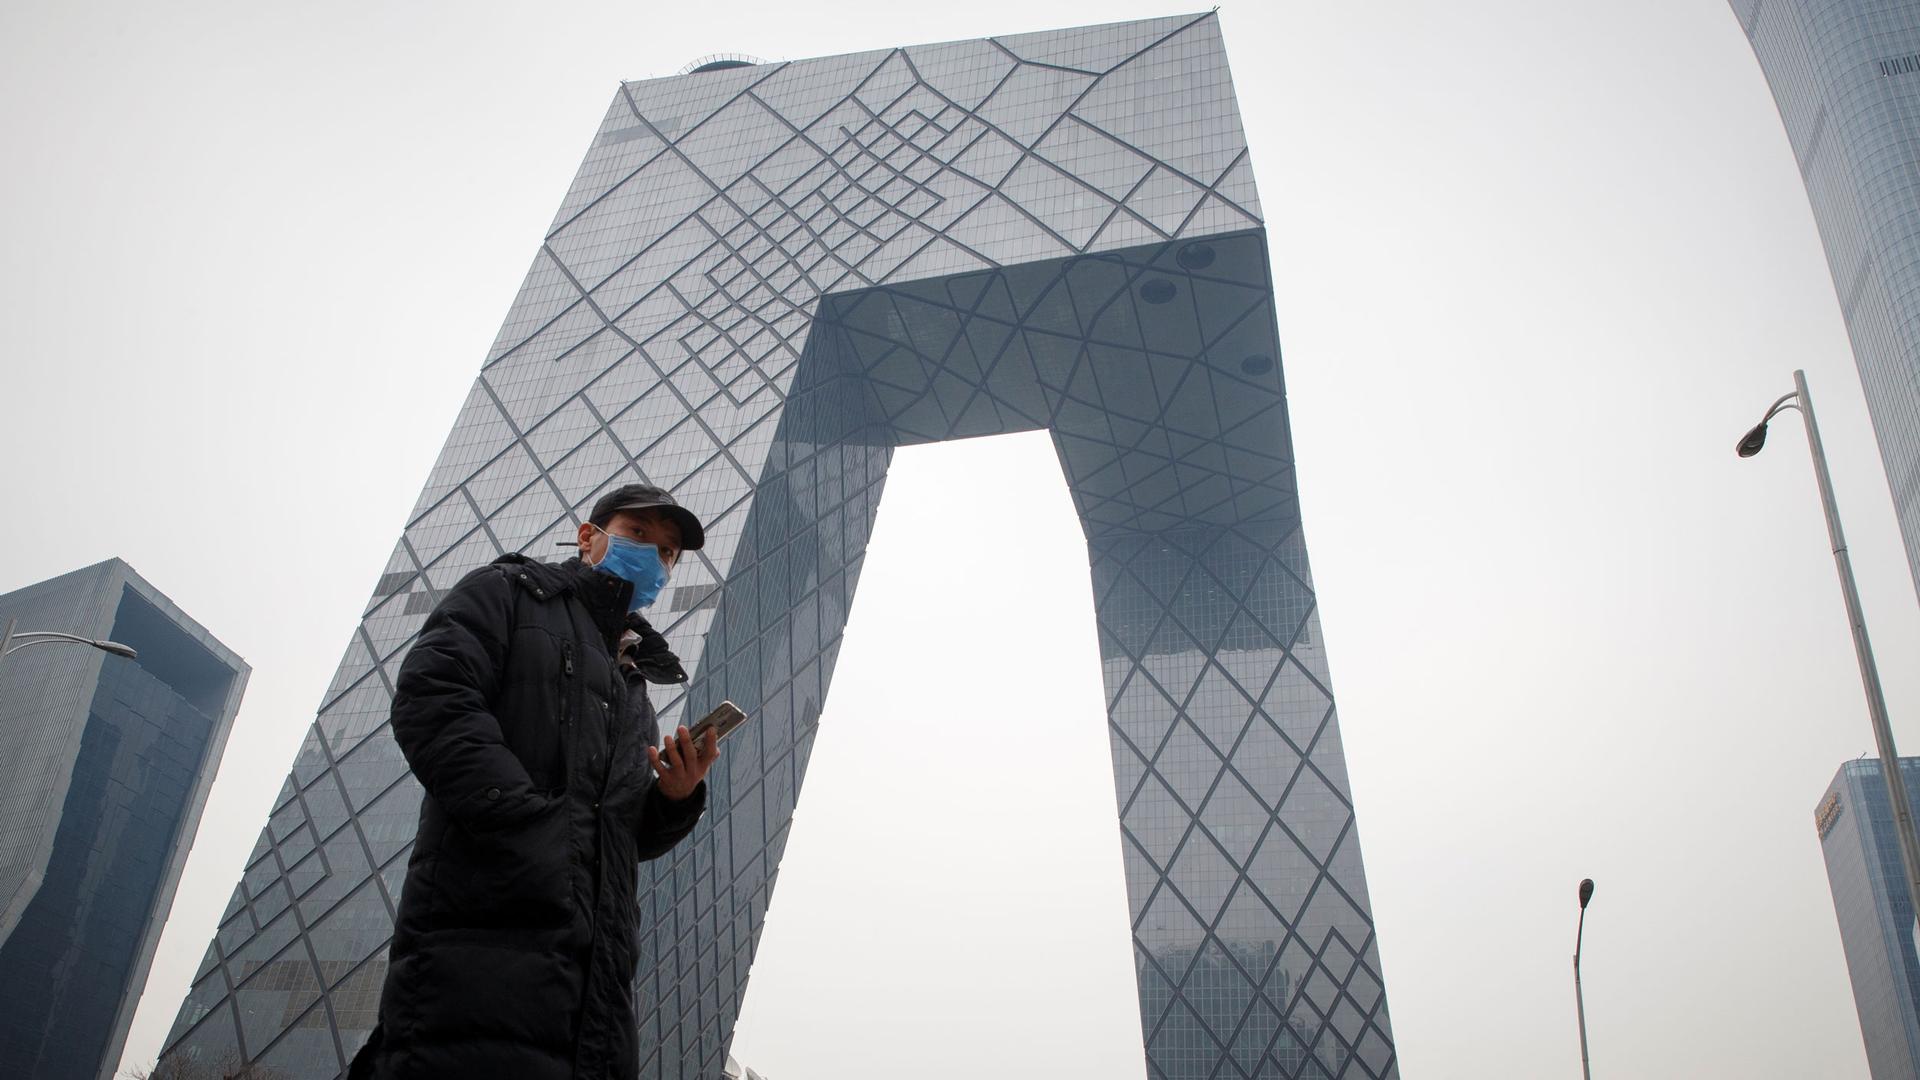 A man is shown standing in front of the CCTV headquarters building with a mobile phone and wearing a face mask.